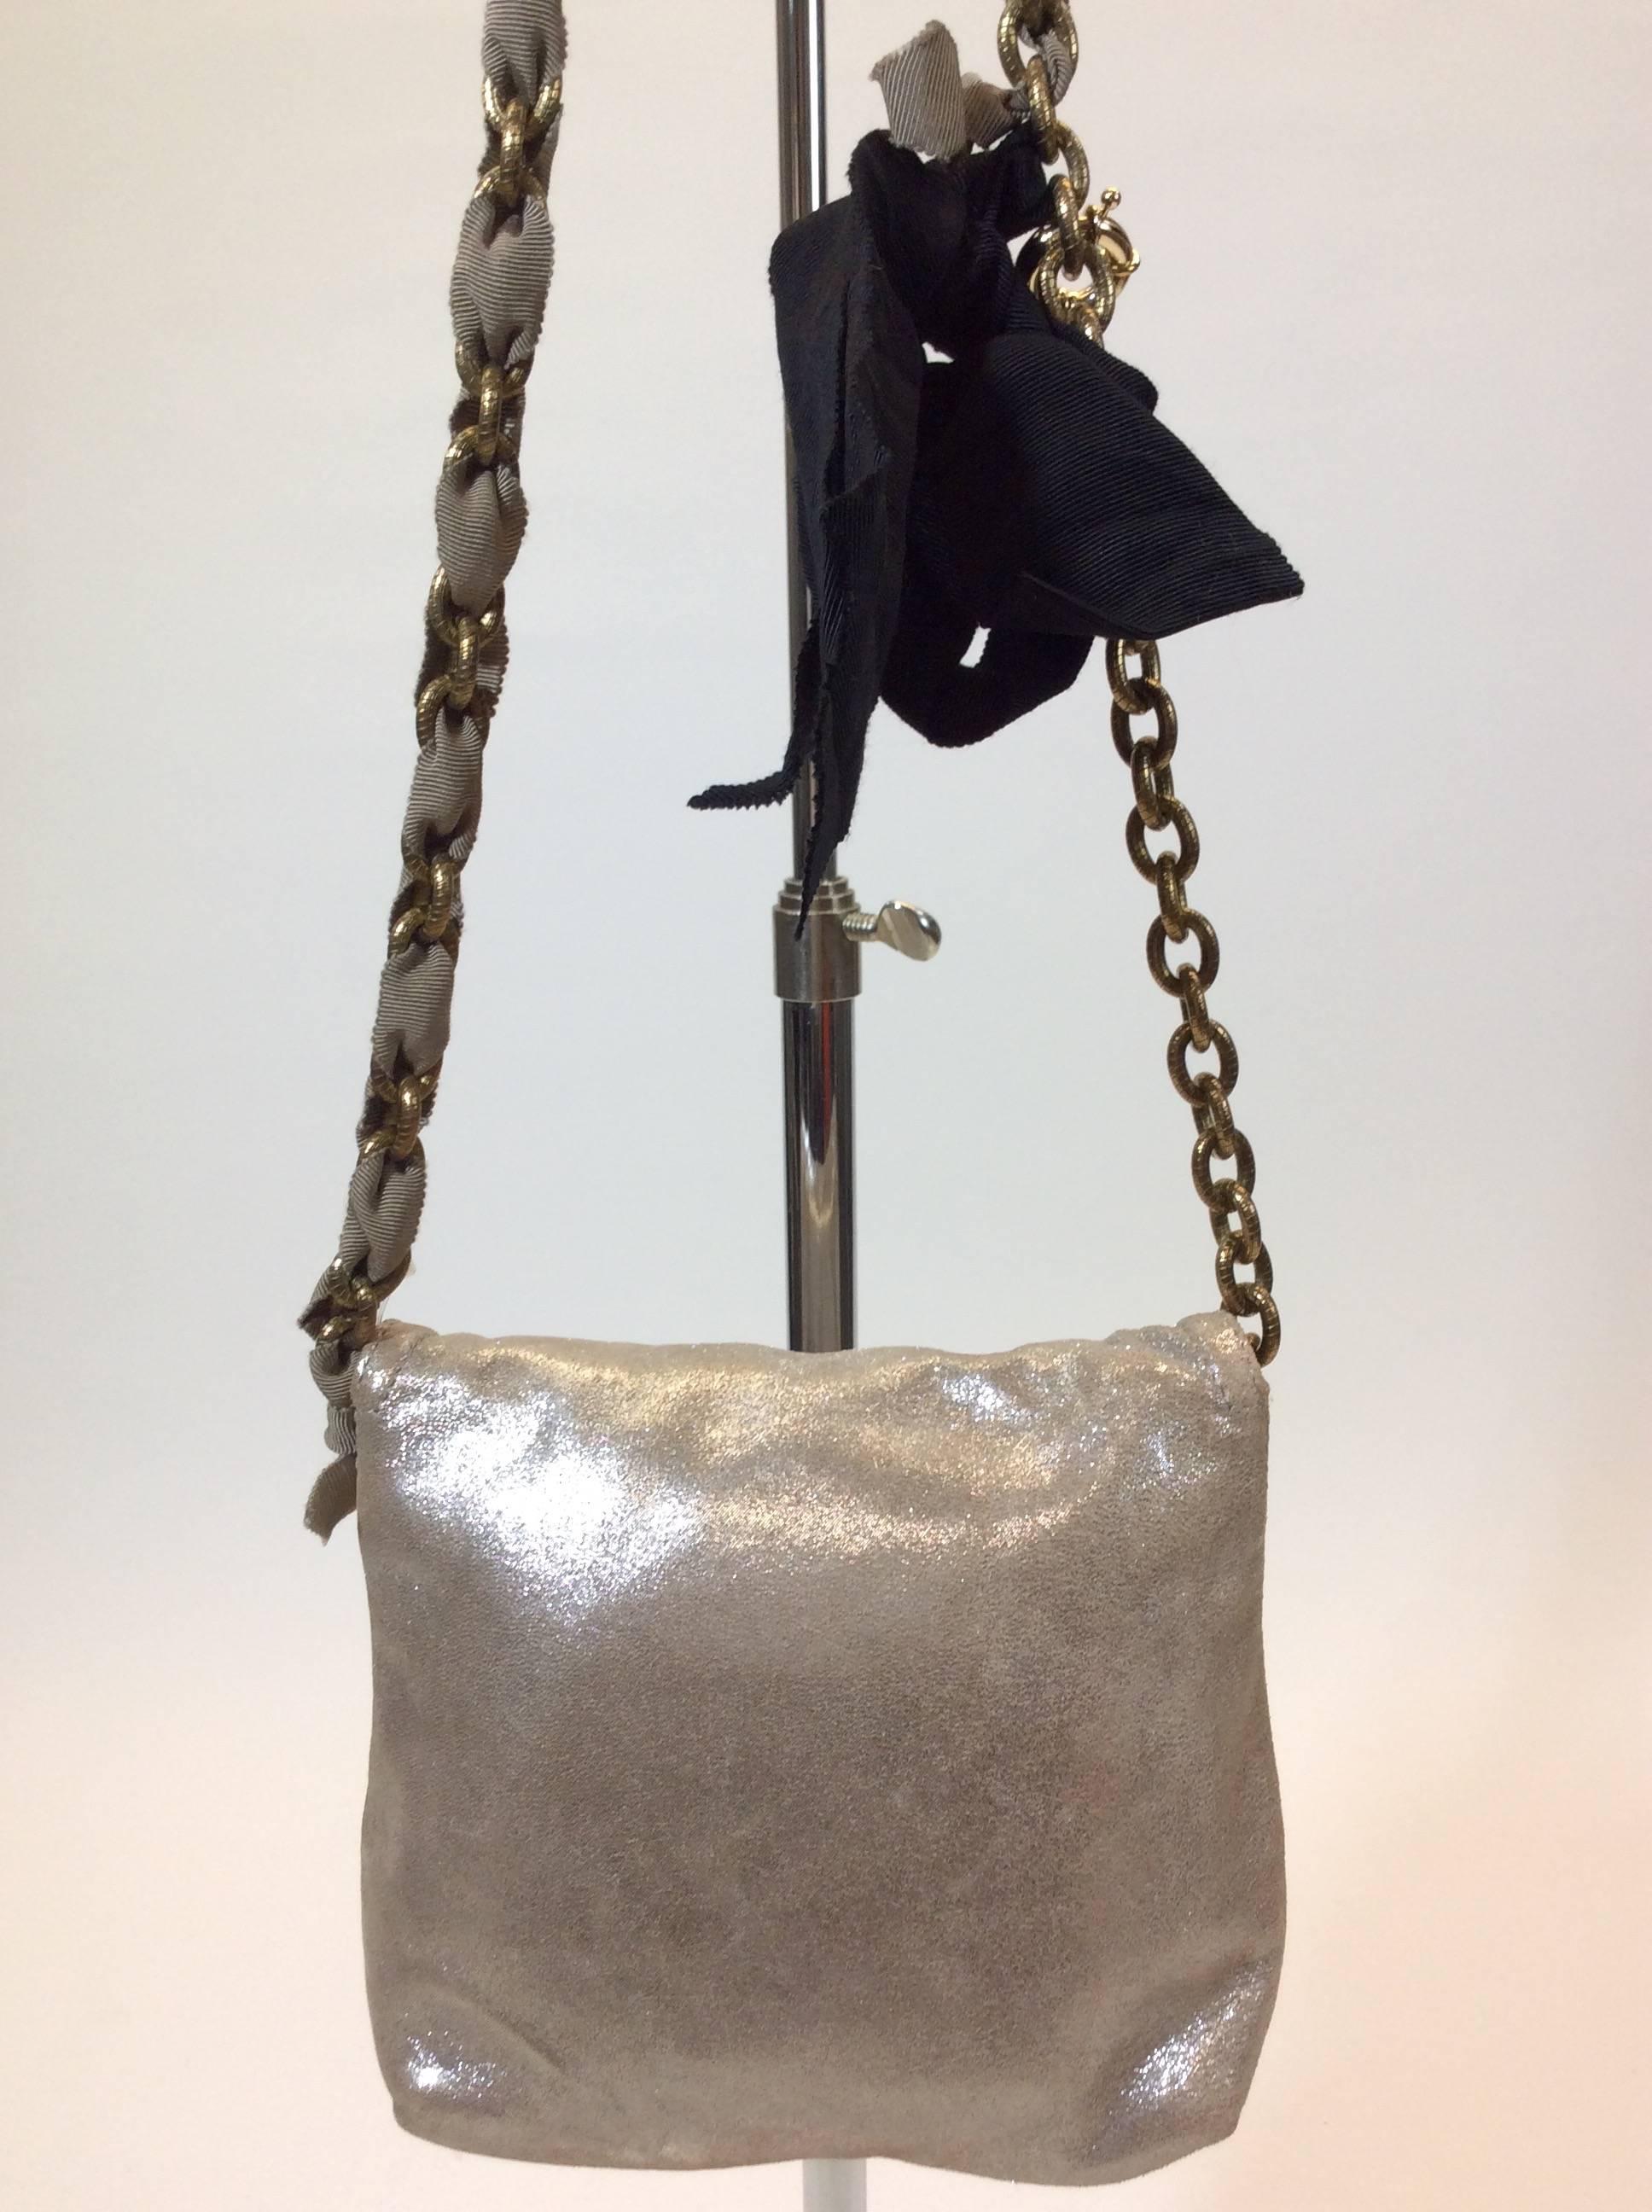 Lanvin Small Metallic Leather Crossbody with Goldtone Braided Chain In Excellent Condition For Sale In Narberth, PA